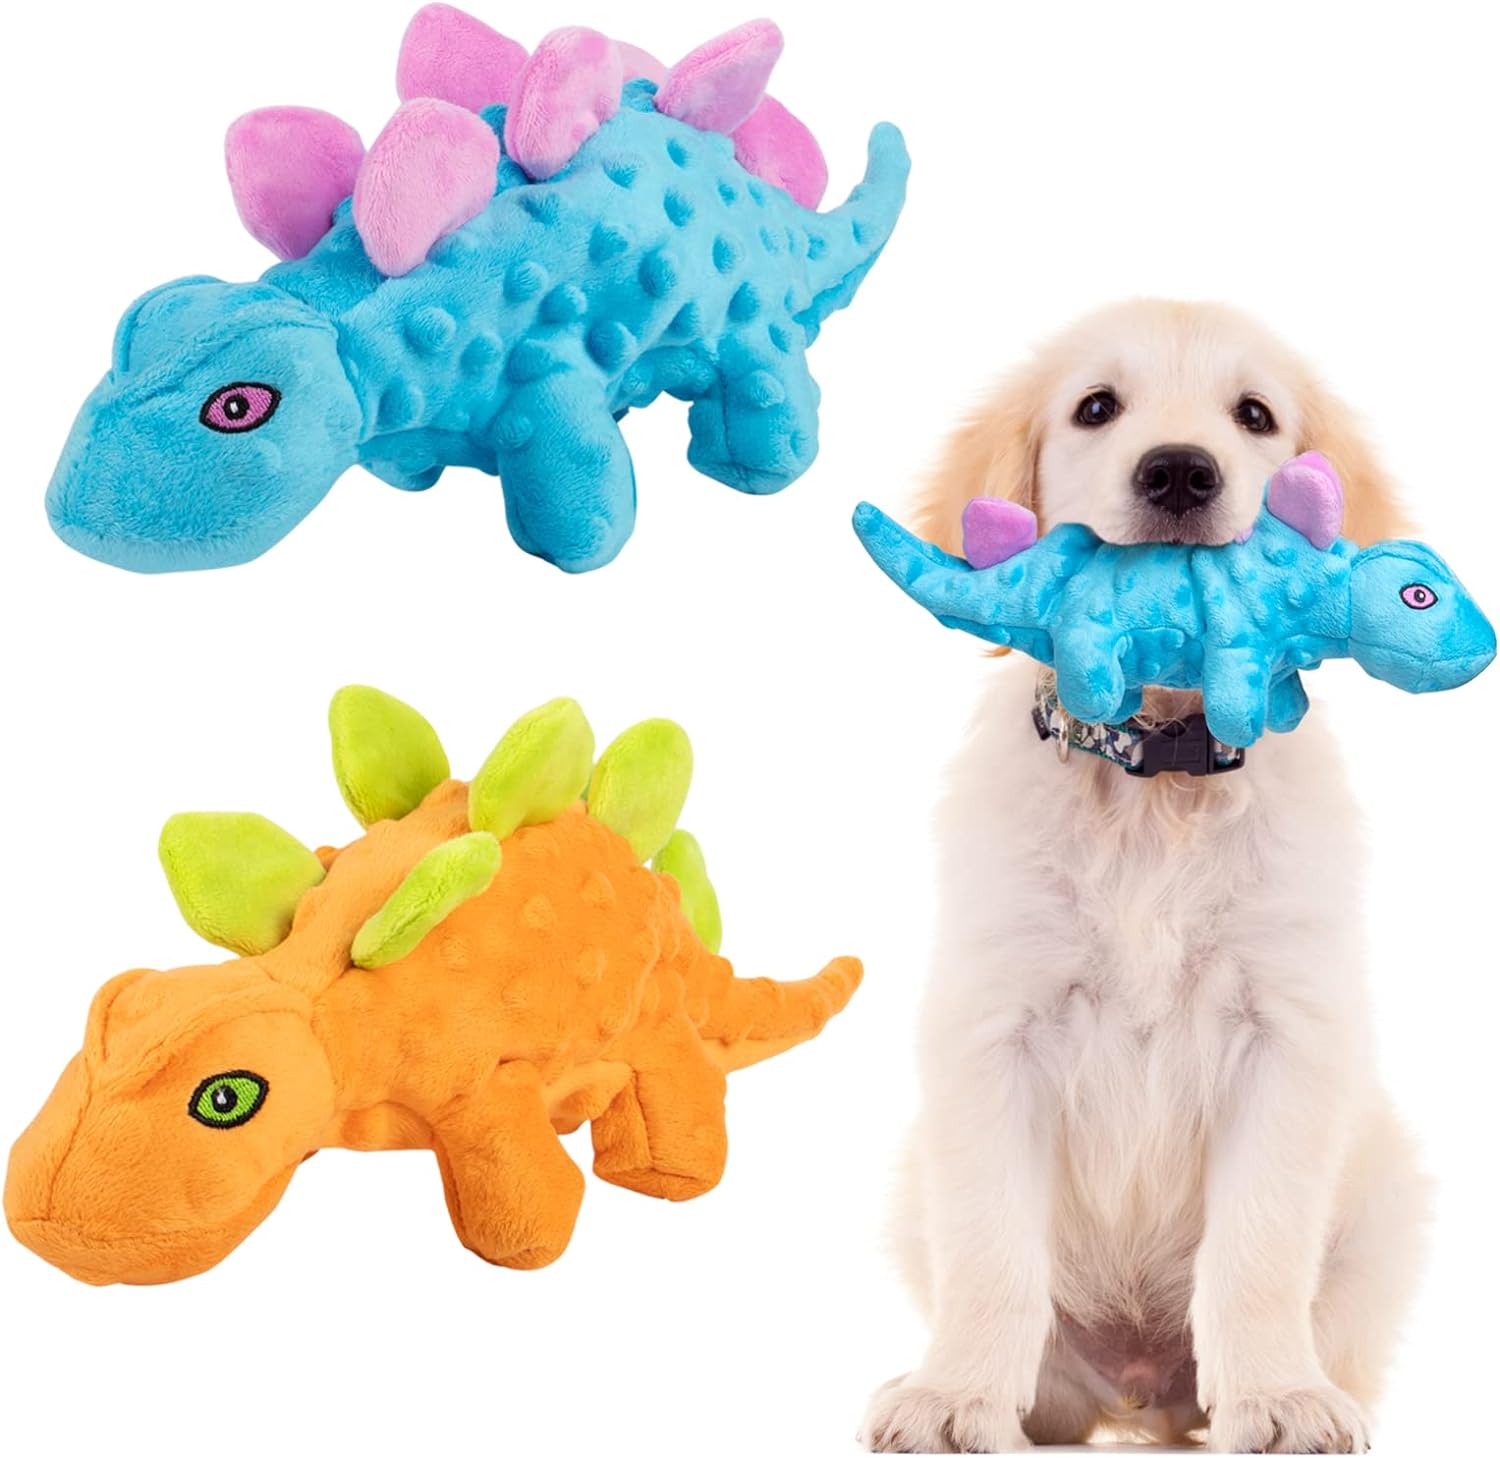 Alphatool Squeaky Dog Toys, Octopus Toys for Aggressive Chewers, Tough No Stuffing Plush Large Dogs, Crinkle Interactive Puppy Small Medium Dogs(3pcs)